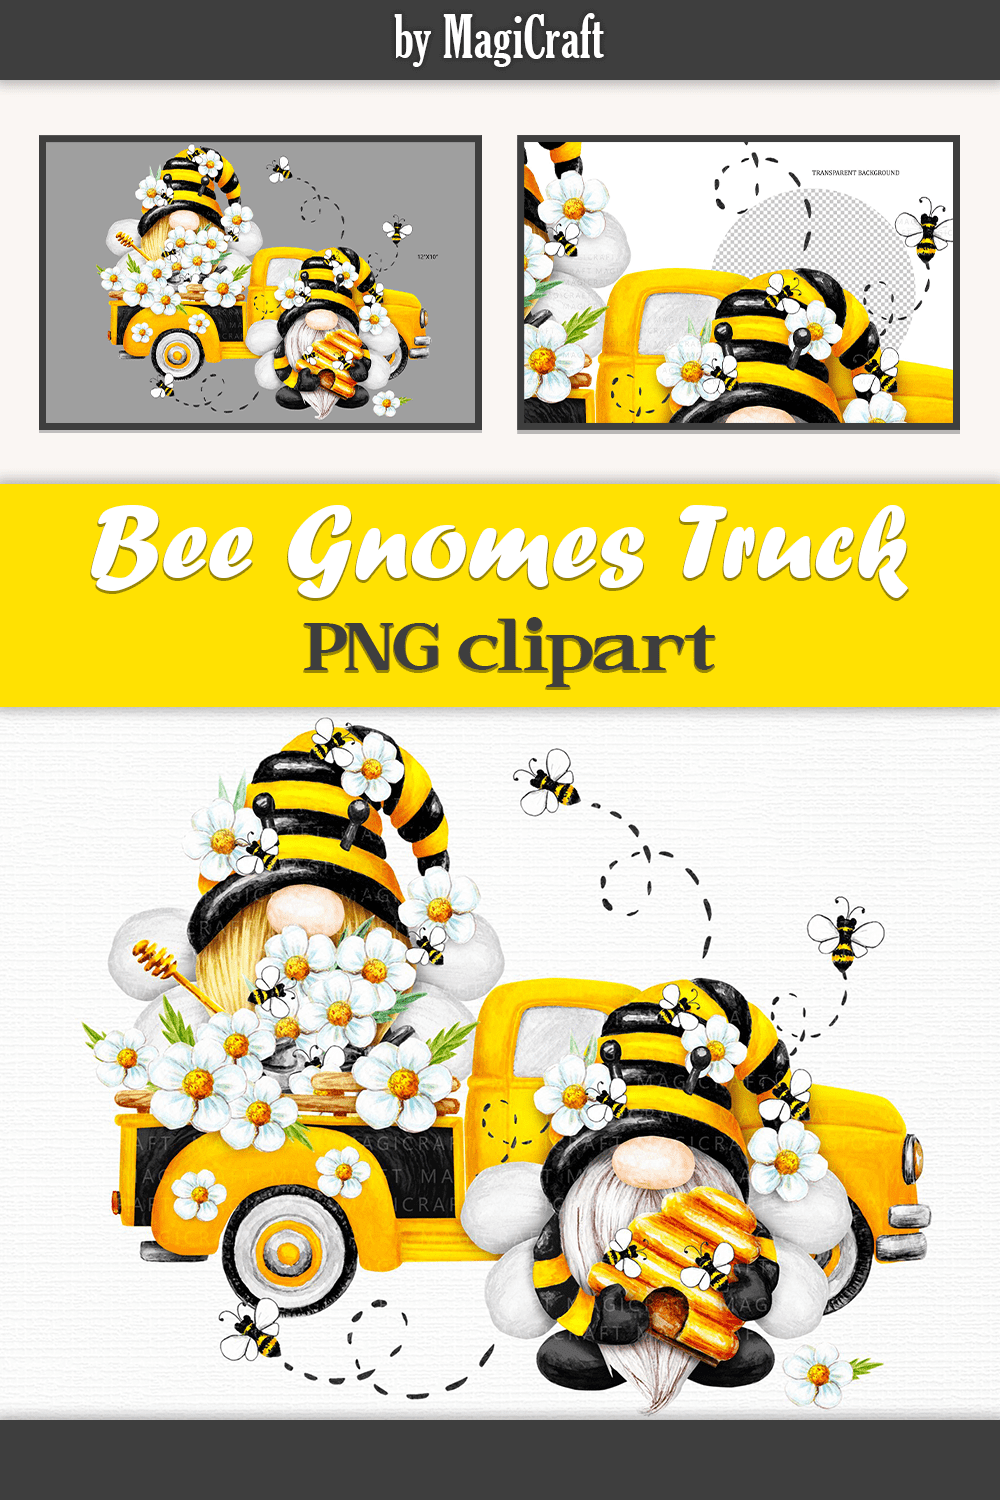 Bee gnomes truck clipart watercolor - pinterest image preview.